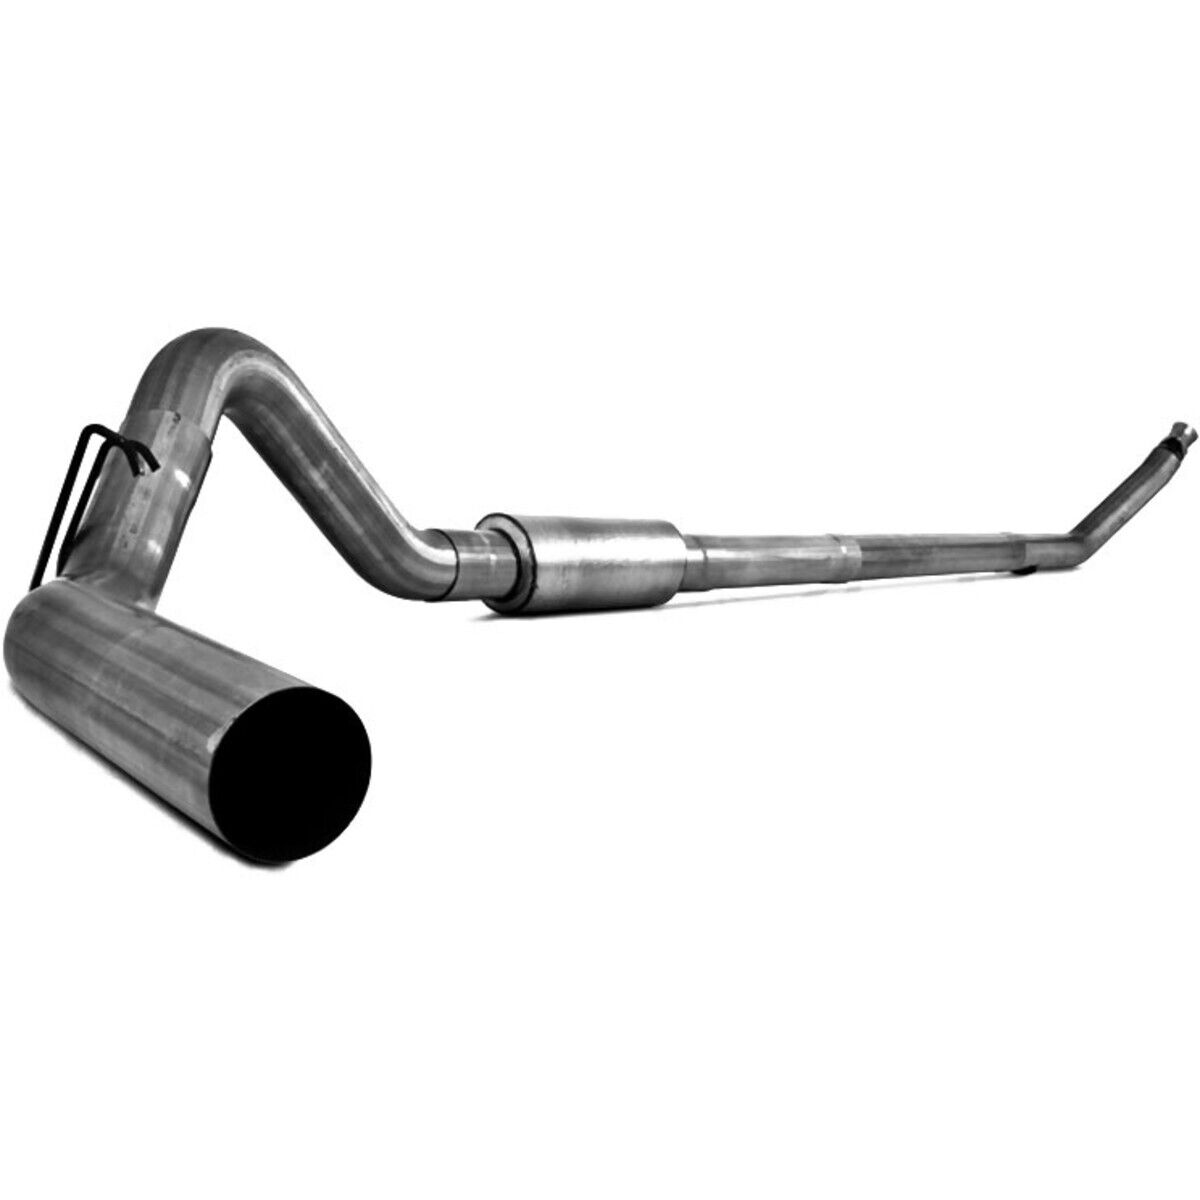 S6100P MBRP Exhaust System for Ram Truck Dodge 2500 3500 1994-2002